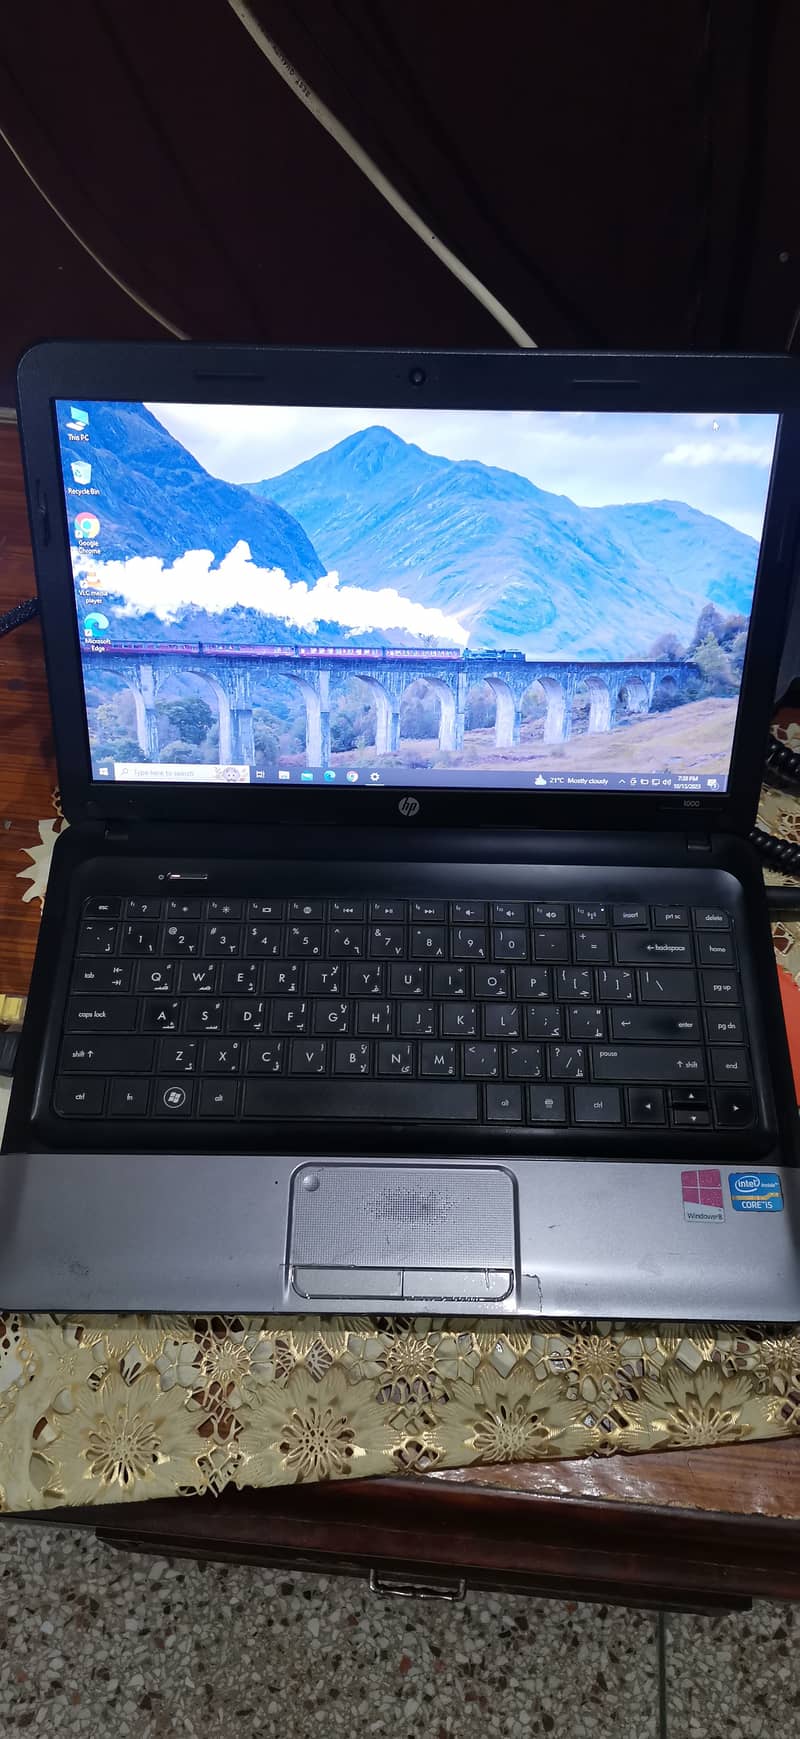 Upgraded Specs Hp1000 i5 Notebook PC 320/ 6GB bought from UAE Xchng. P 6